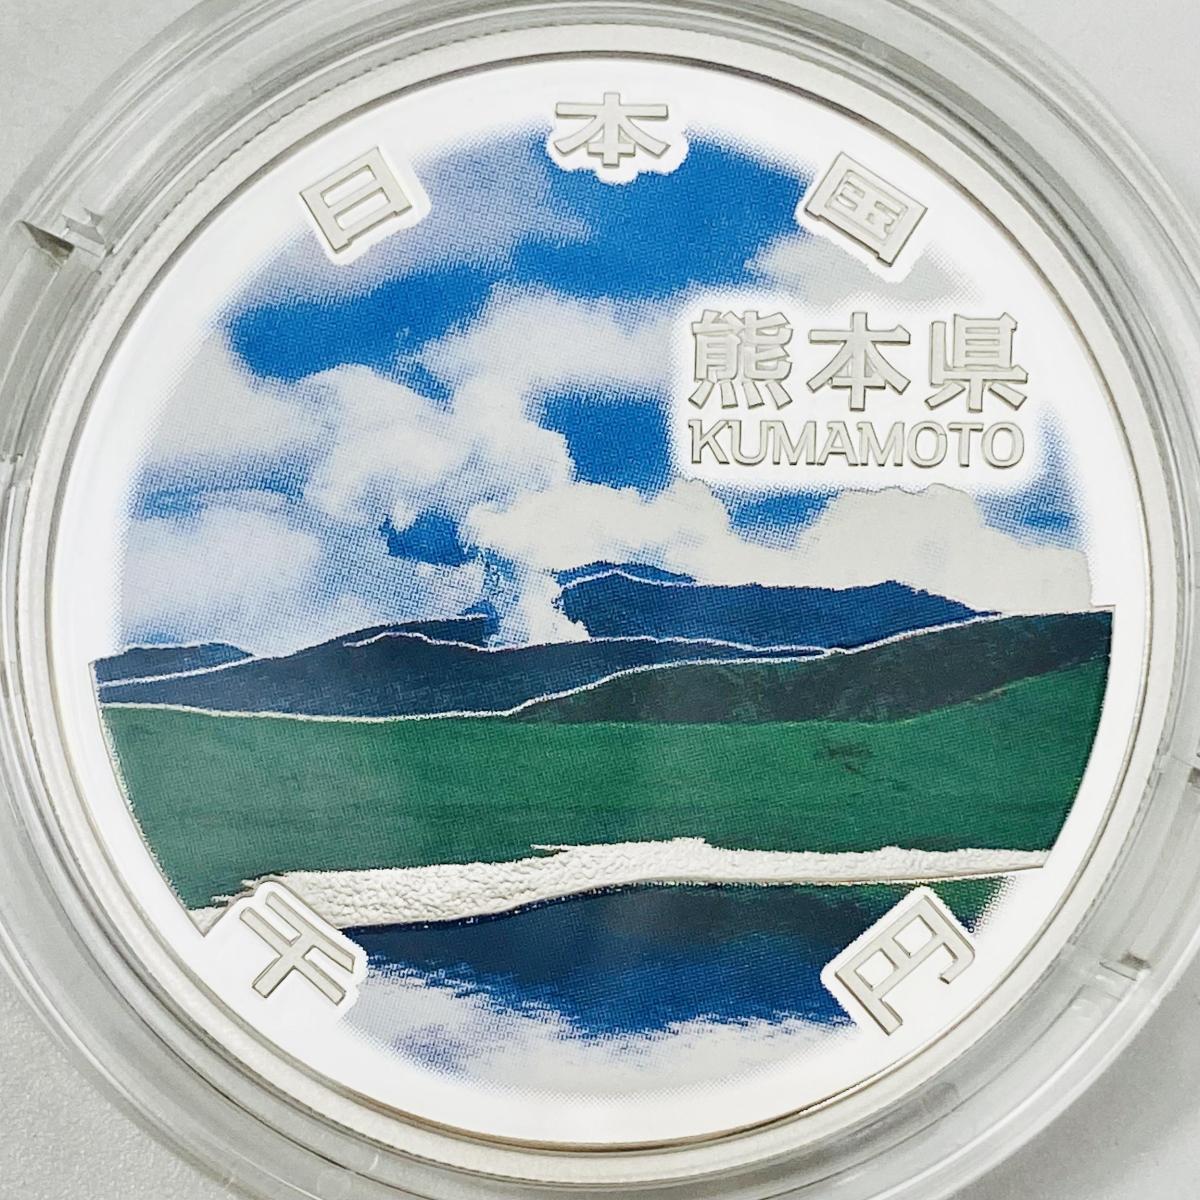  local government law . line 60 anniversary commemoration Kumamoto prefecture district thousand jpy silver coin proof money set A set silver approximately 31.1g prefectures commemorative coin precious metal medal region coin structure . department 